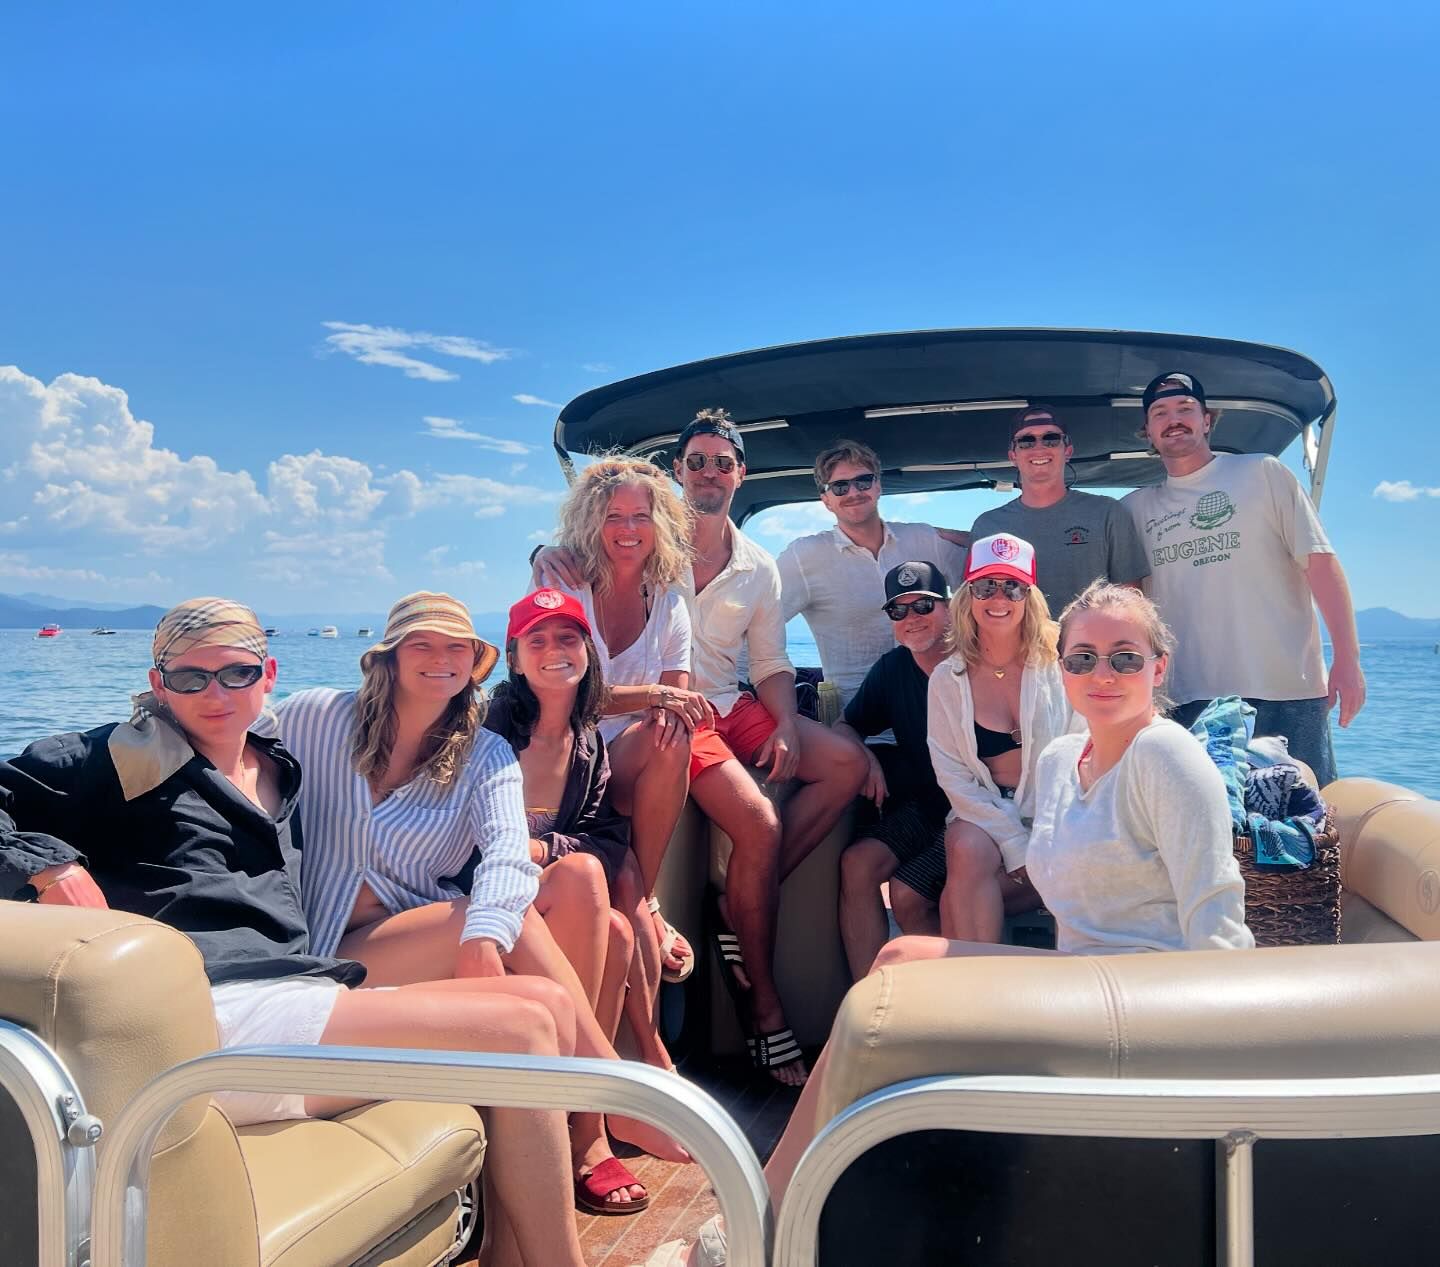 Laura Wright and others during their getaway